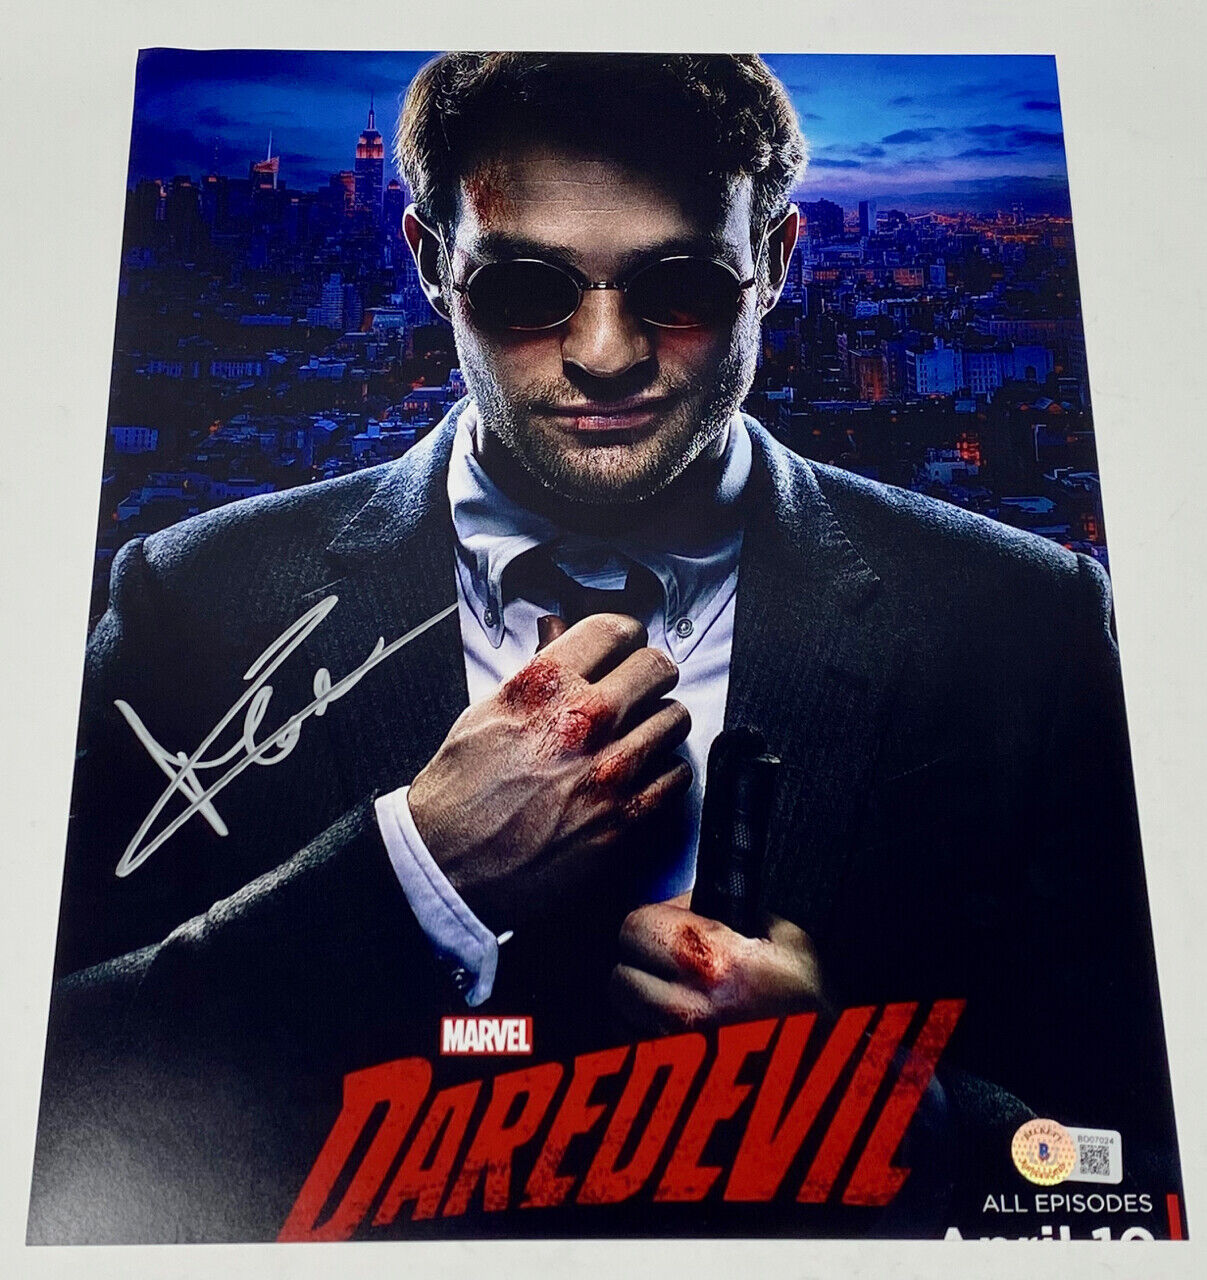 Charlie Cox Signed Autographed 11x14 Photo Poster painting Daredevil Beckett BAS COA